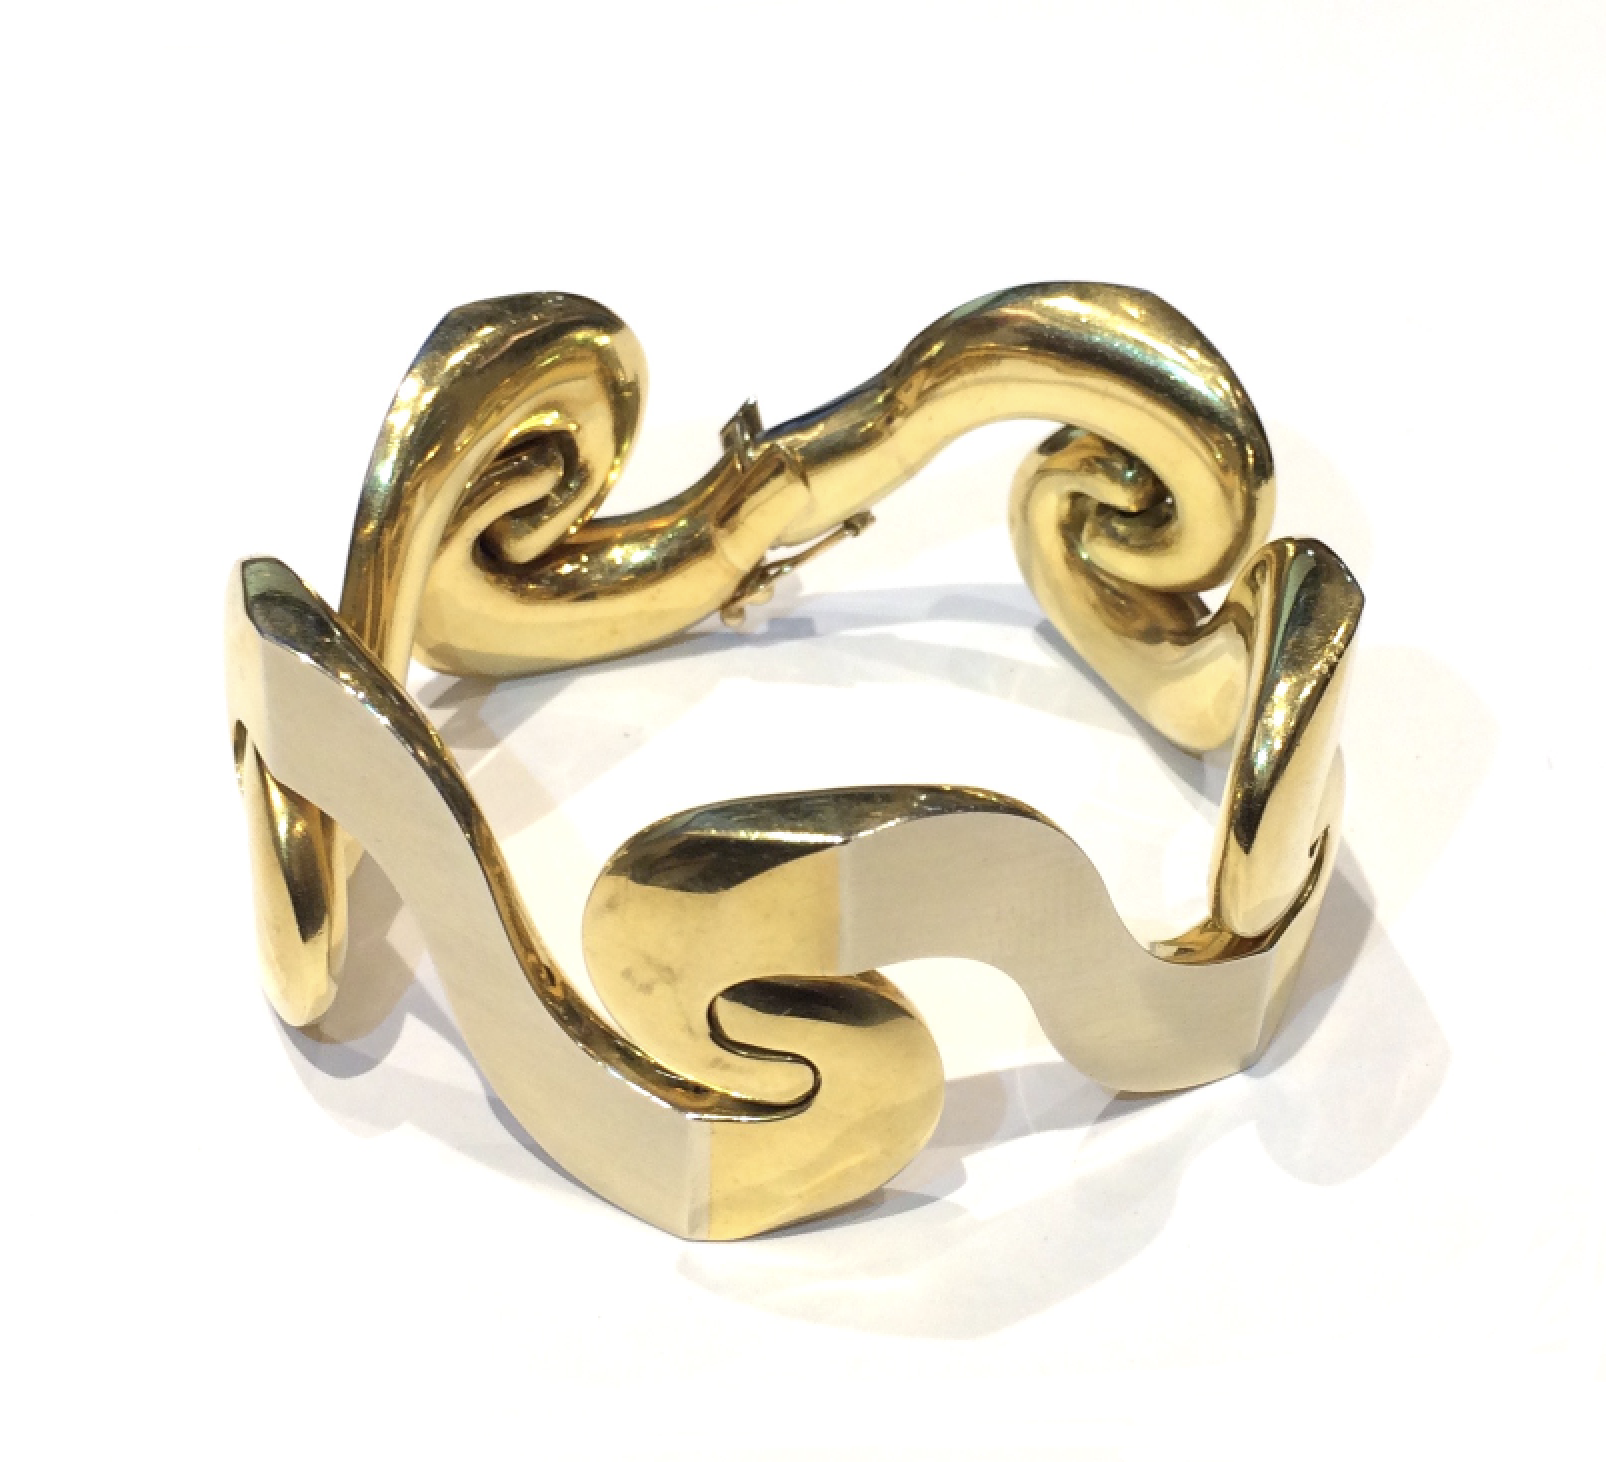 Italian “Wave” bracelet, contoured interlocking and looping links in 18K yellow and satin brushed white gold, marked, c. 1960’s